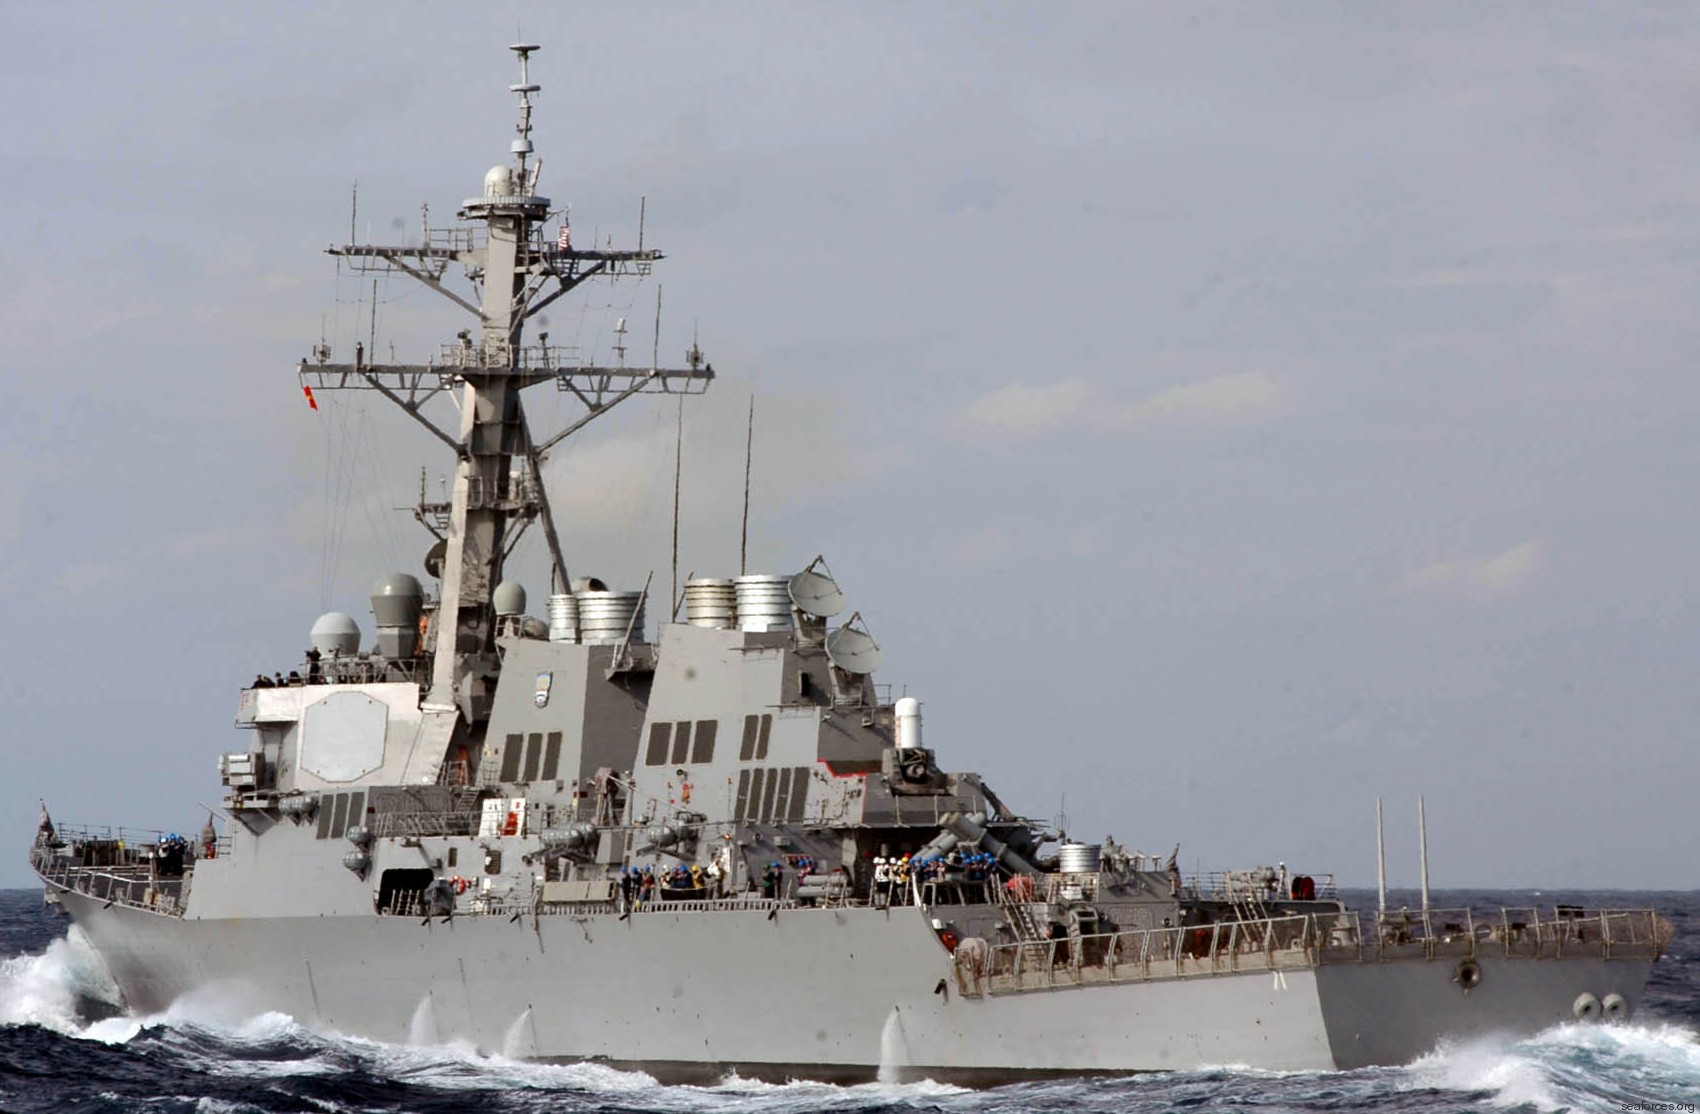 ddg-71 uss ross guided missile destroyer arleigh burke class aegis bmd 89